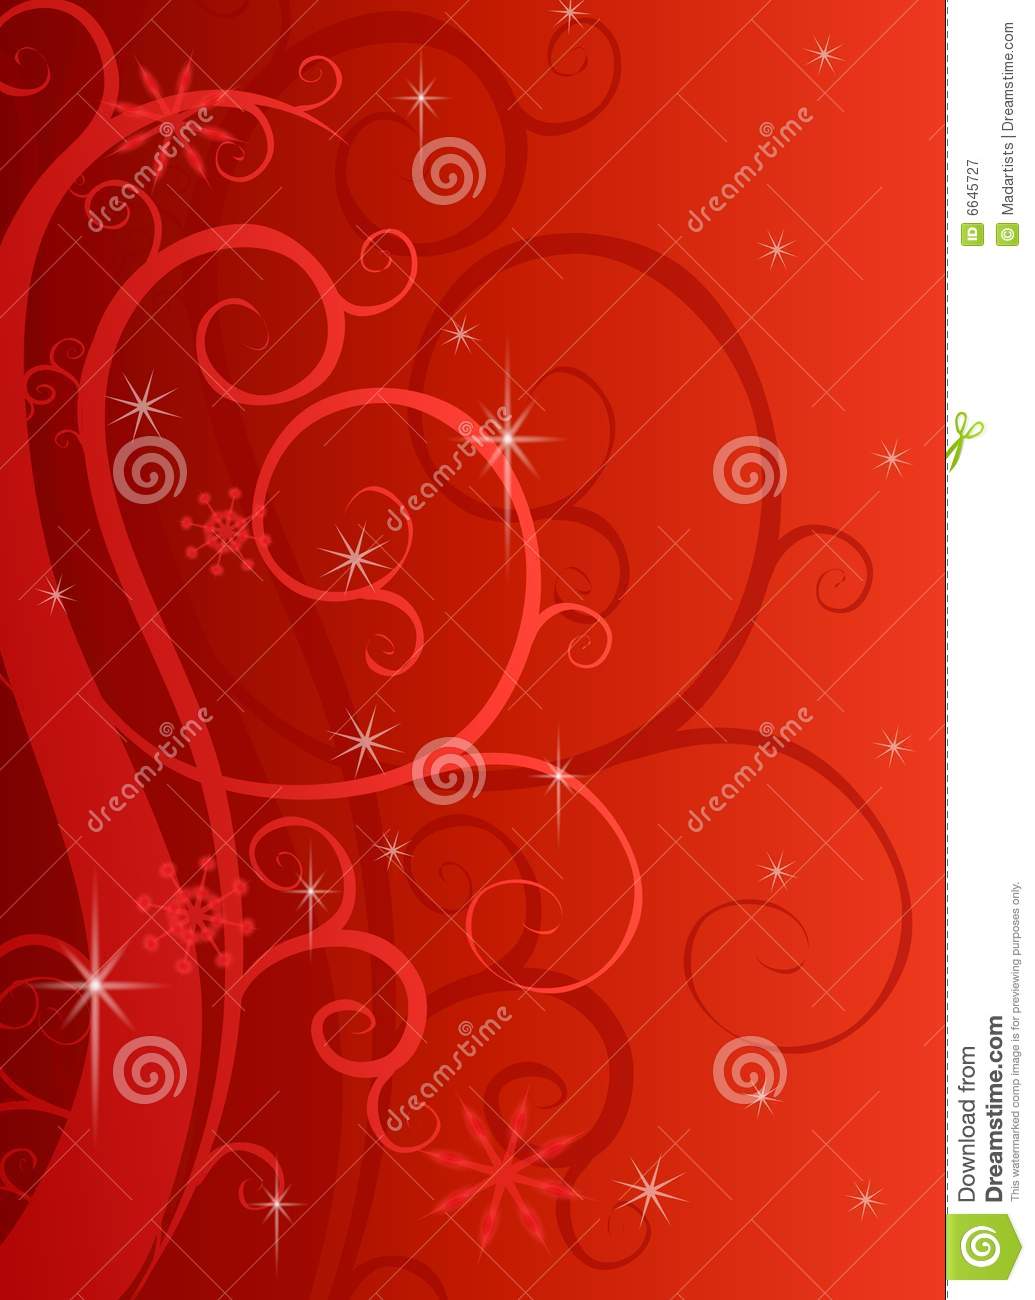 Red Swirl Background Imgkid The Image Kid Has It